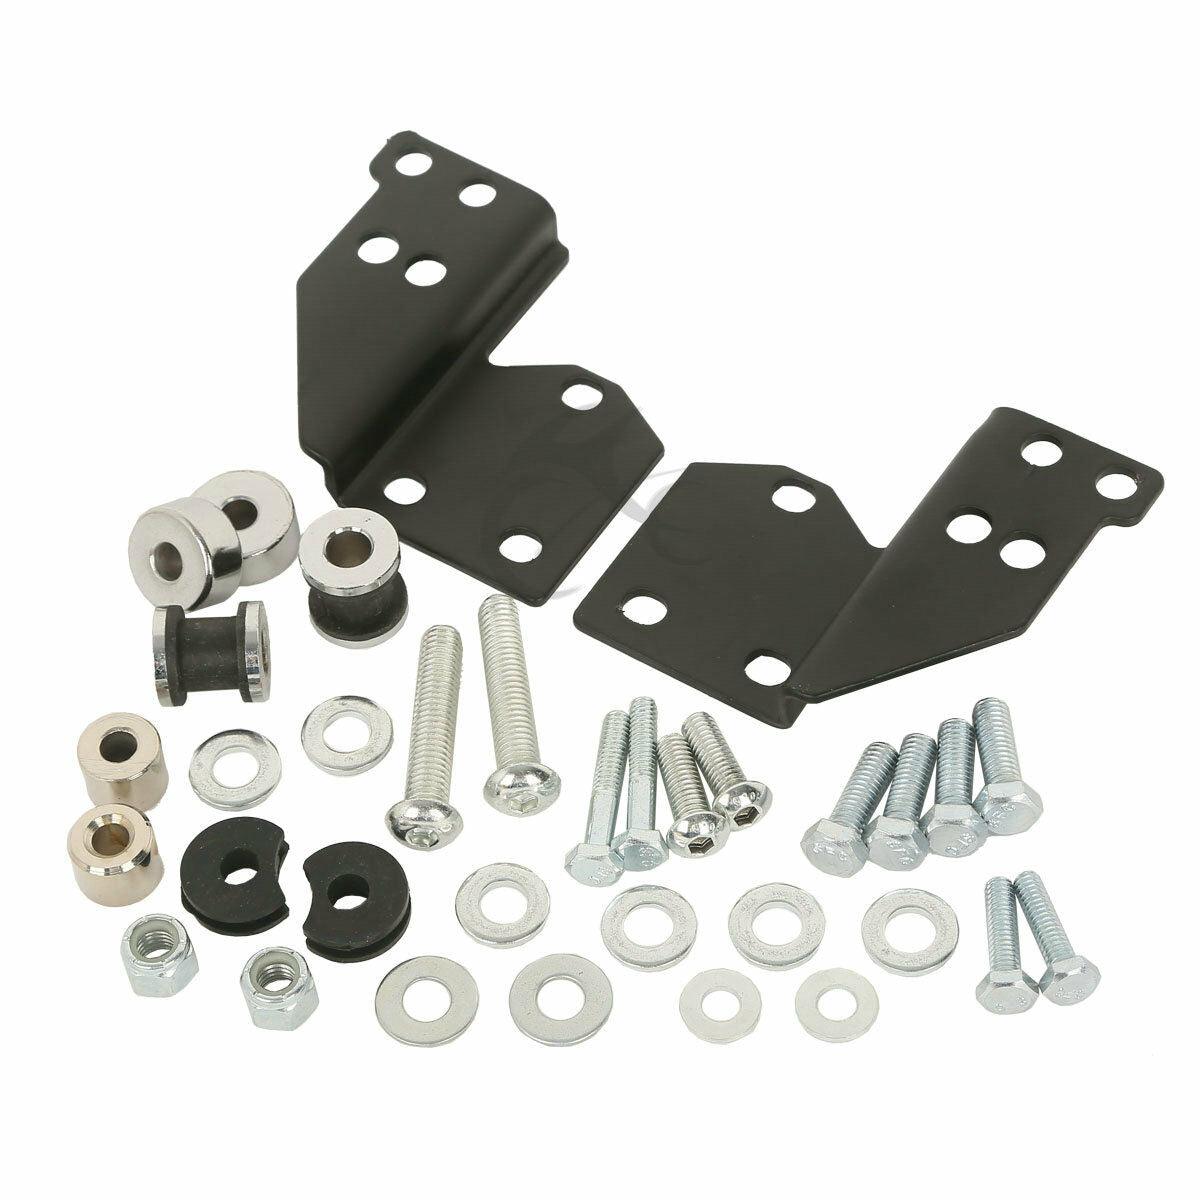 Fit For Harley Road King Electra Glide 97-08 Touring Front Docking Hardware Kit - Moto Life Products